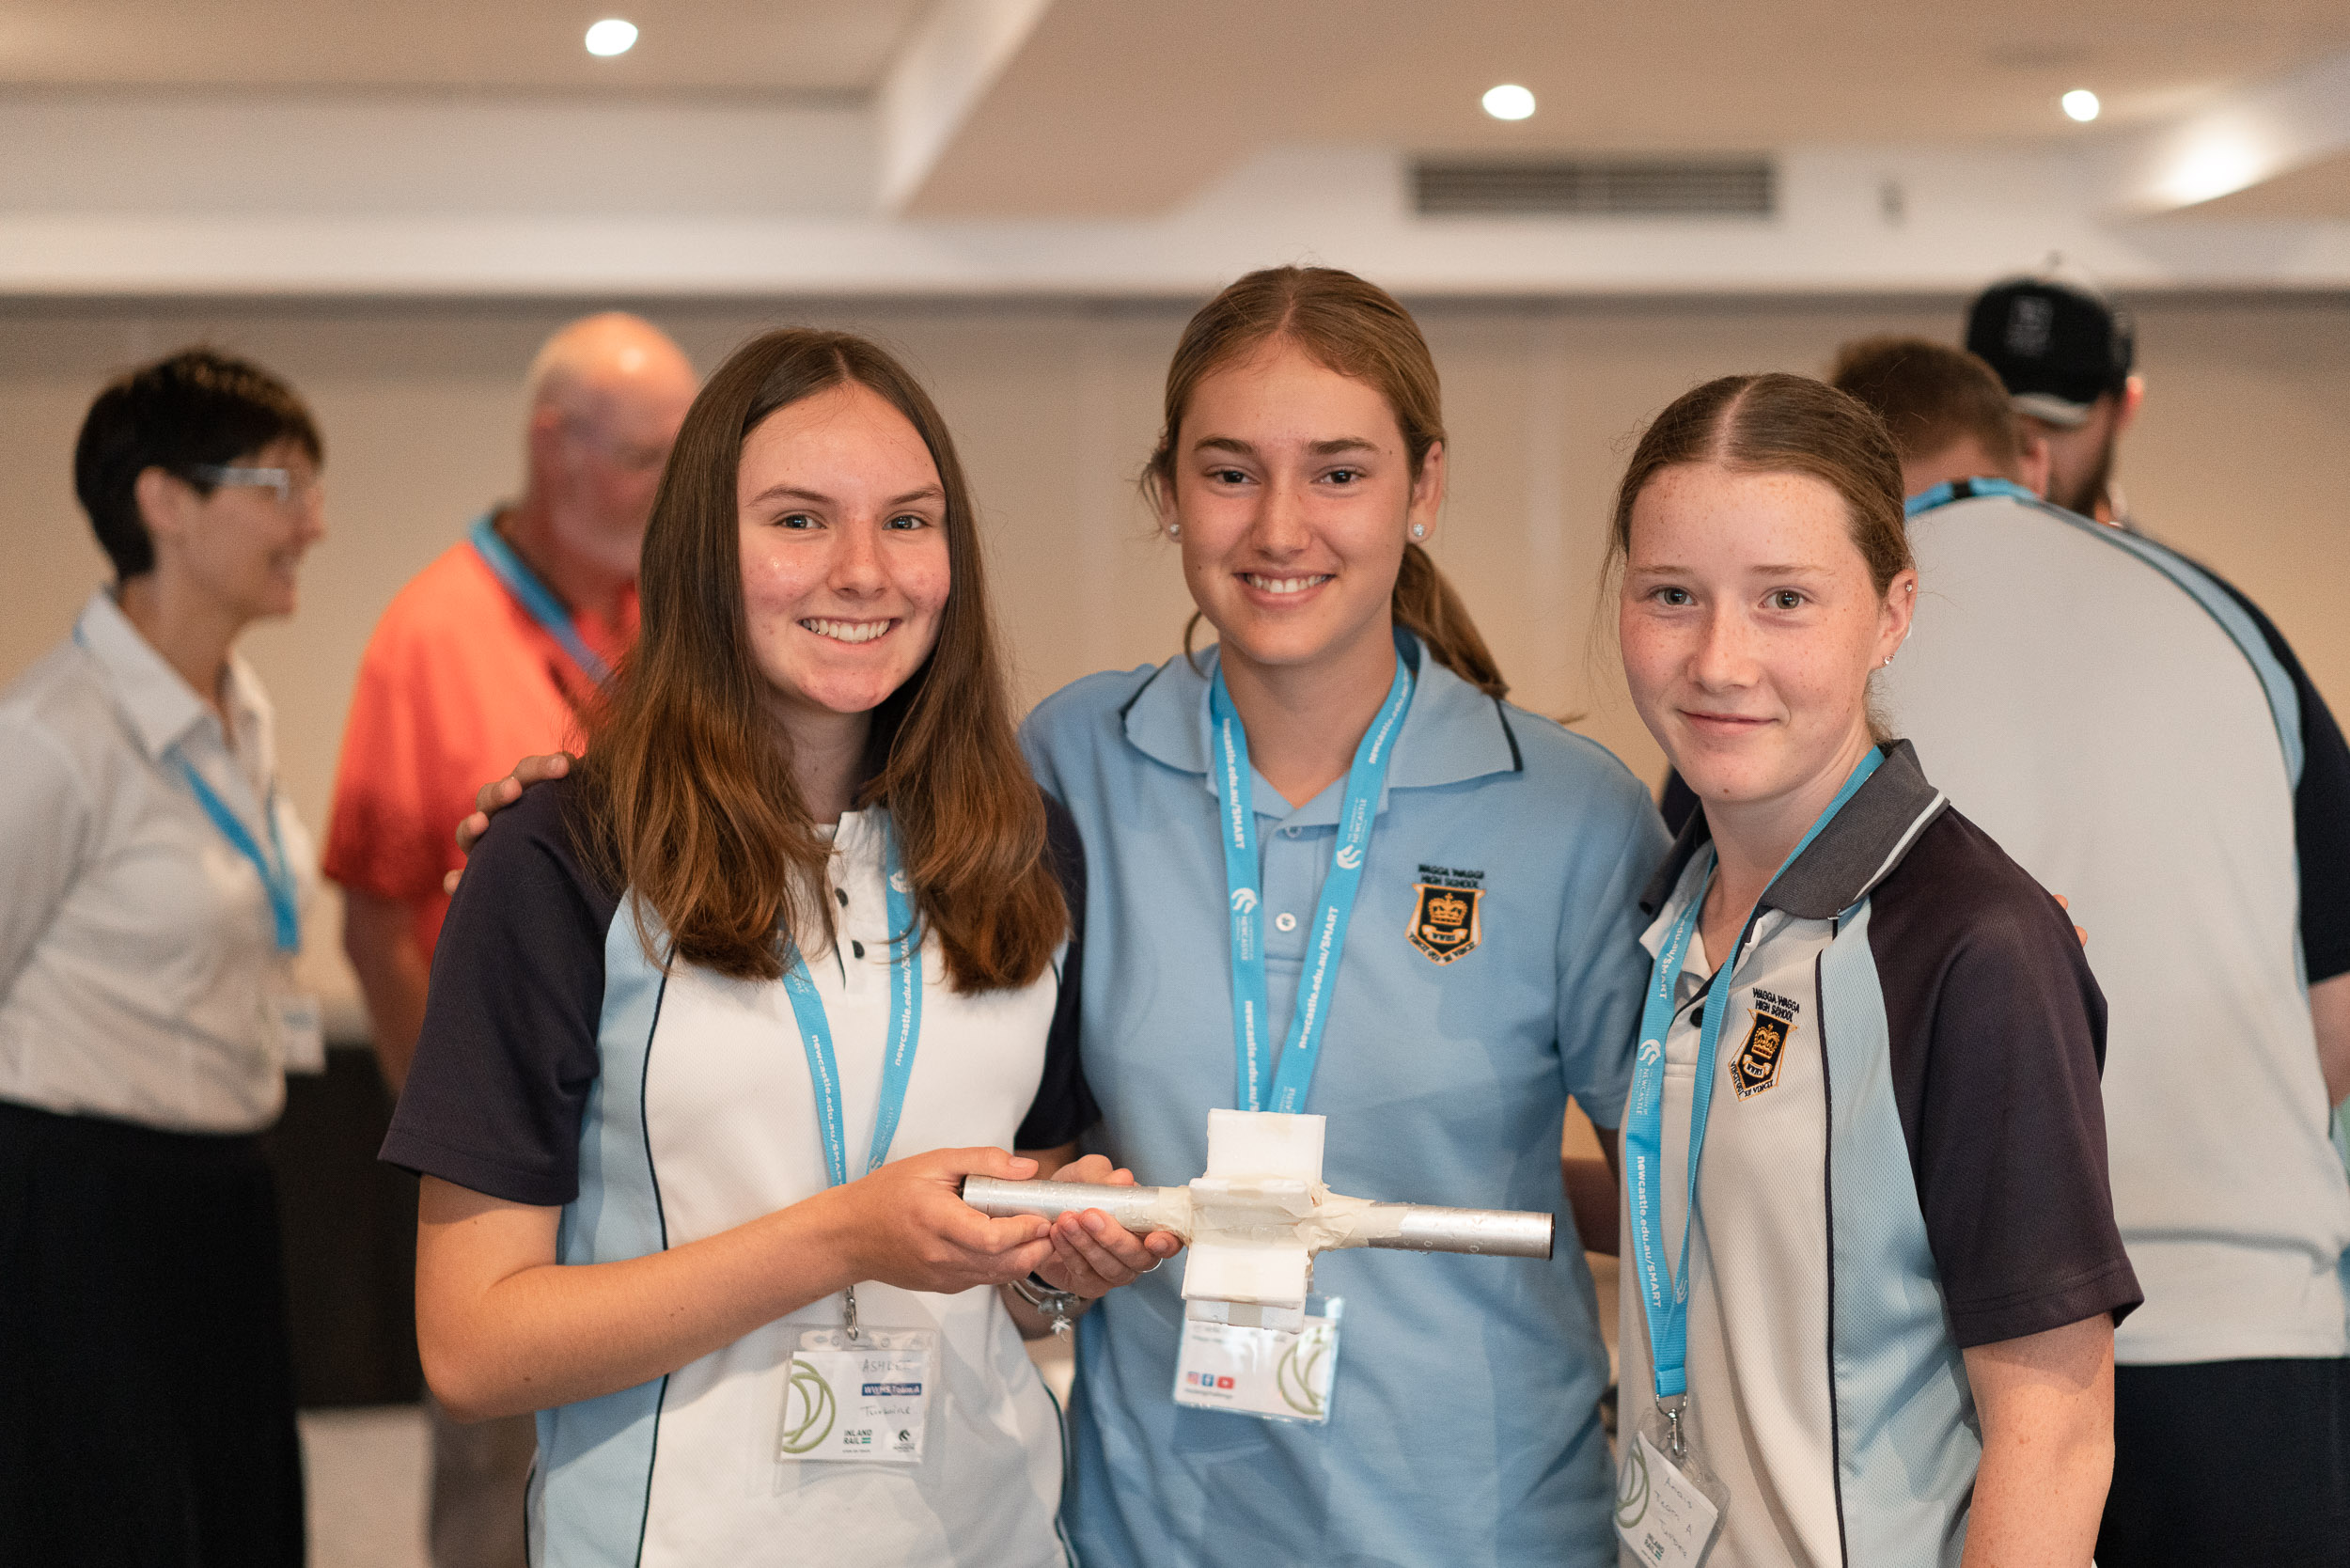 Participants from Wagga Wagga High School at the STEM on Track launch event in Wagga Wagga on 26 November 2020.